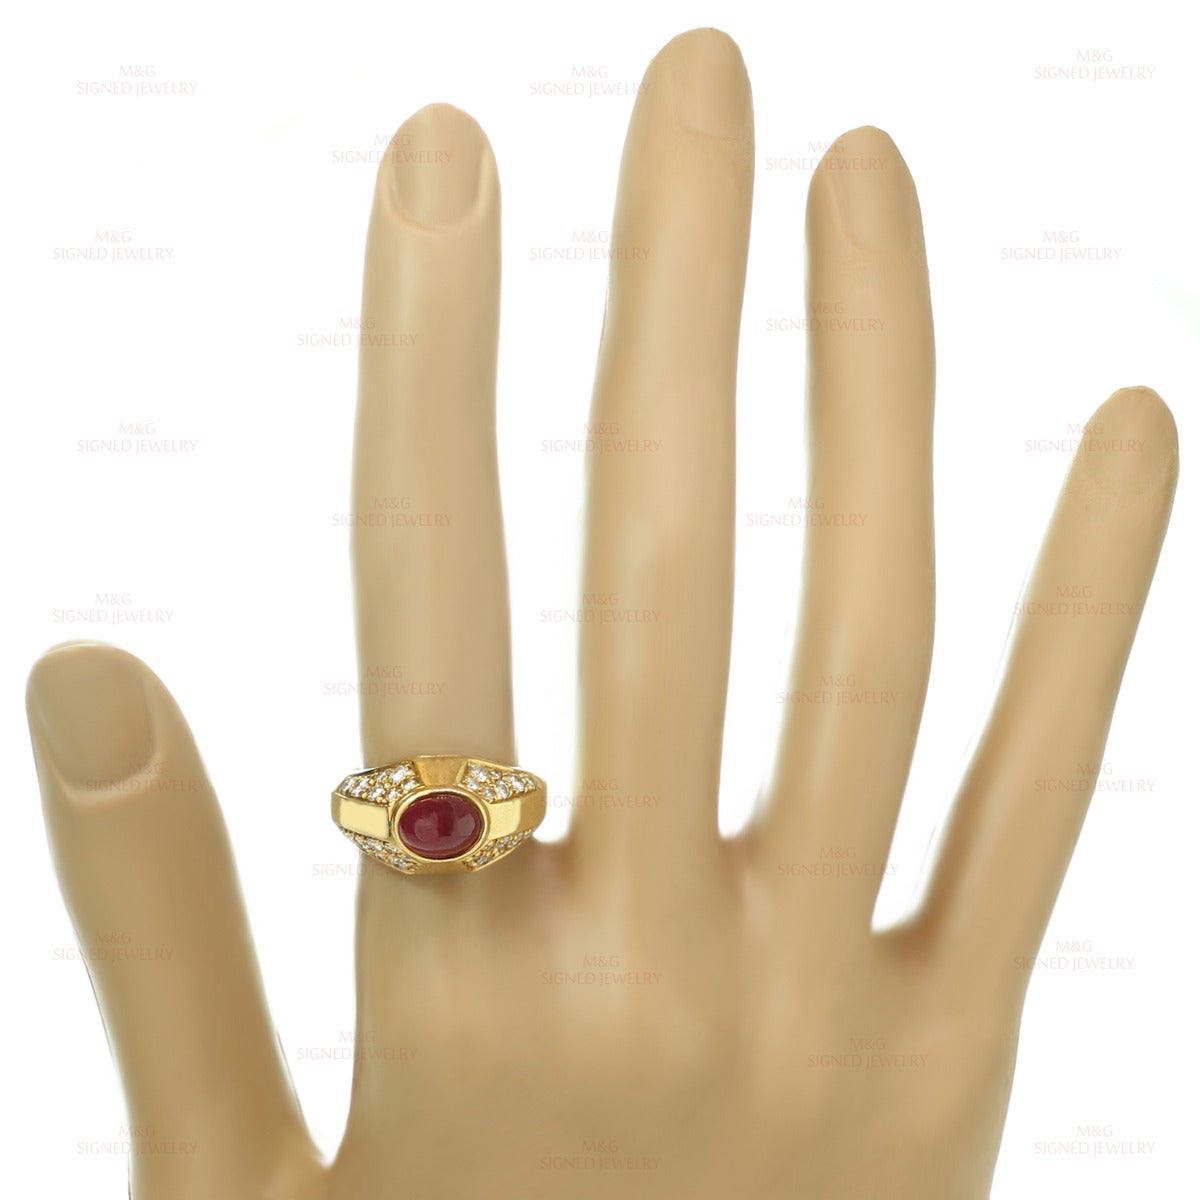 This classic Bvlgari ring is crafted in 18k yellow gold and set with a vivid red oval cabochon ruby of an estimated 2.21 carats accented with round brilliant-cut E-F VVS1-VVS2 diamonds of an estimated 0.80 carats. Made in Italy circa 1980s.